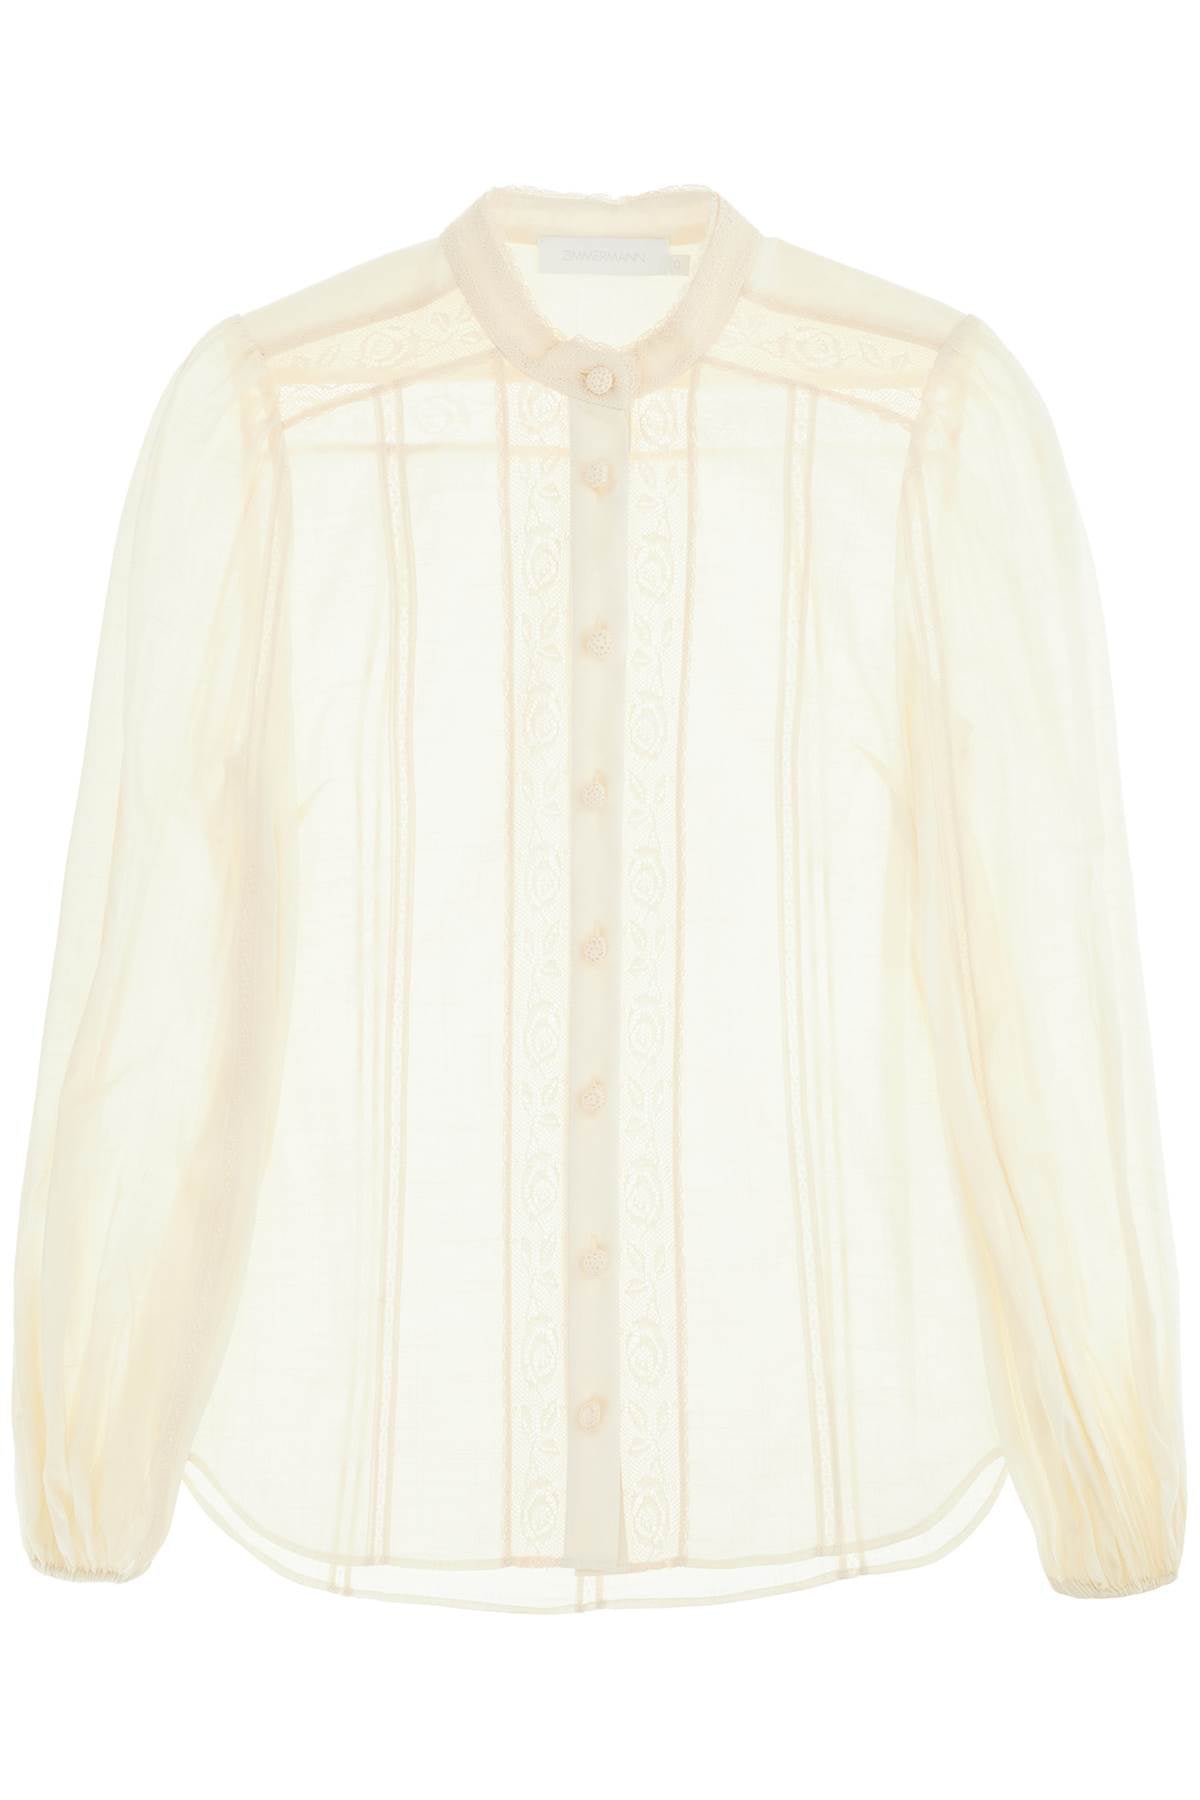 Zimmermann             halliday lace-trimmed shirt - White